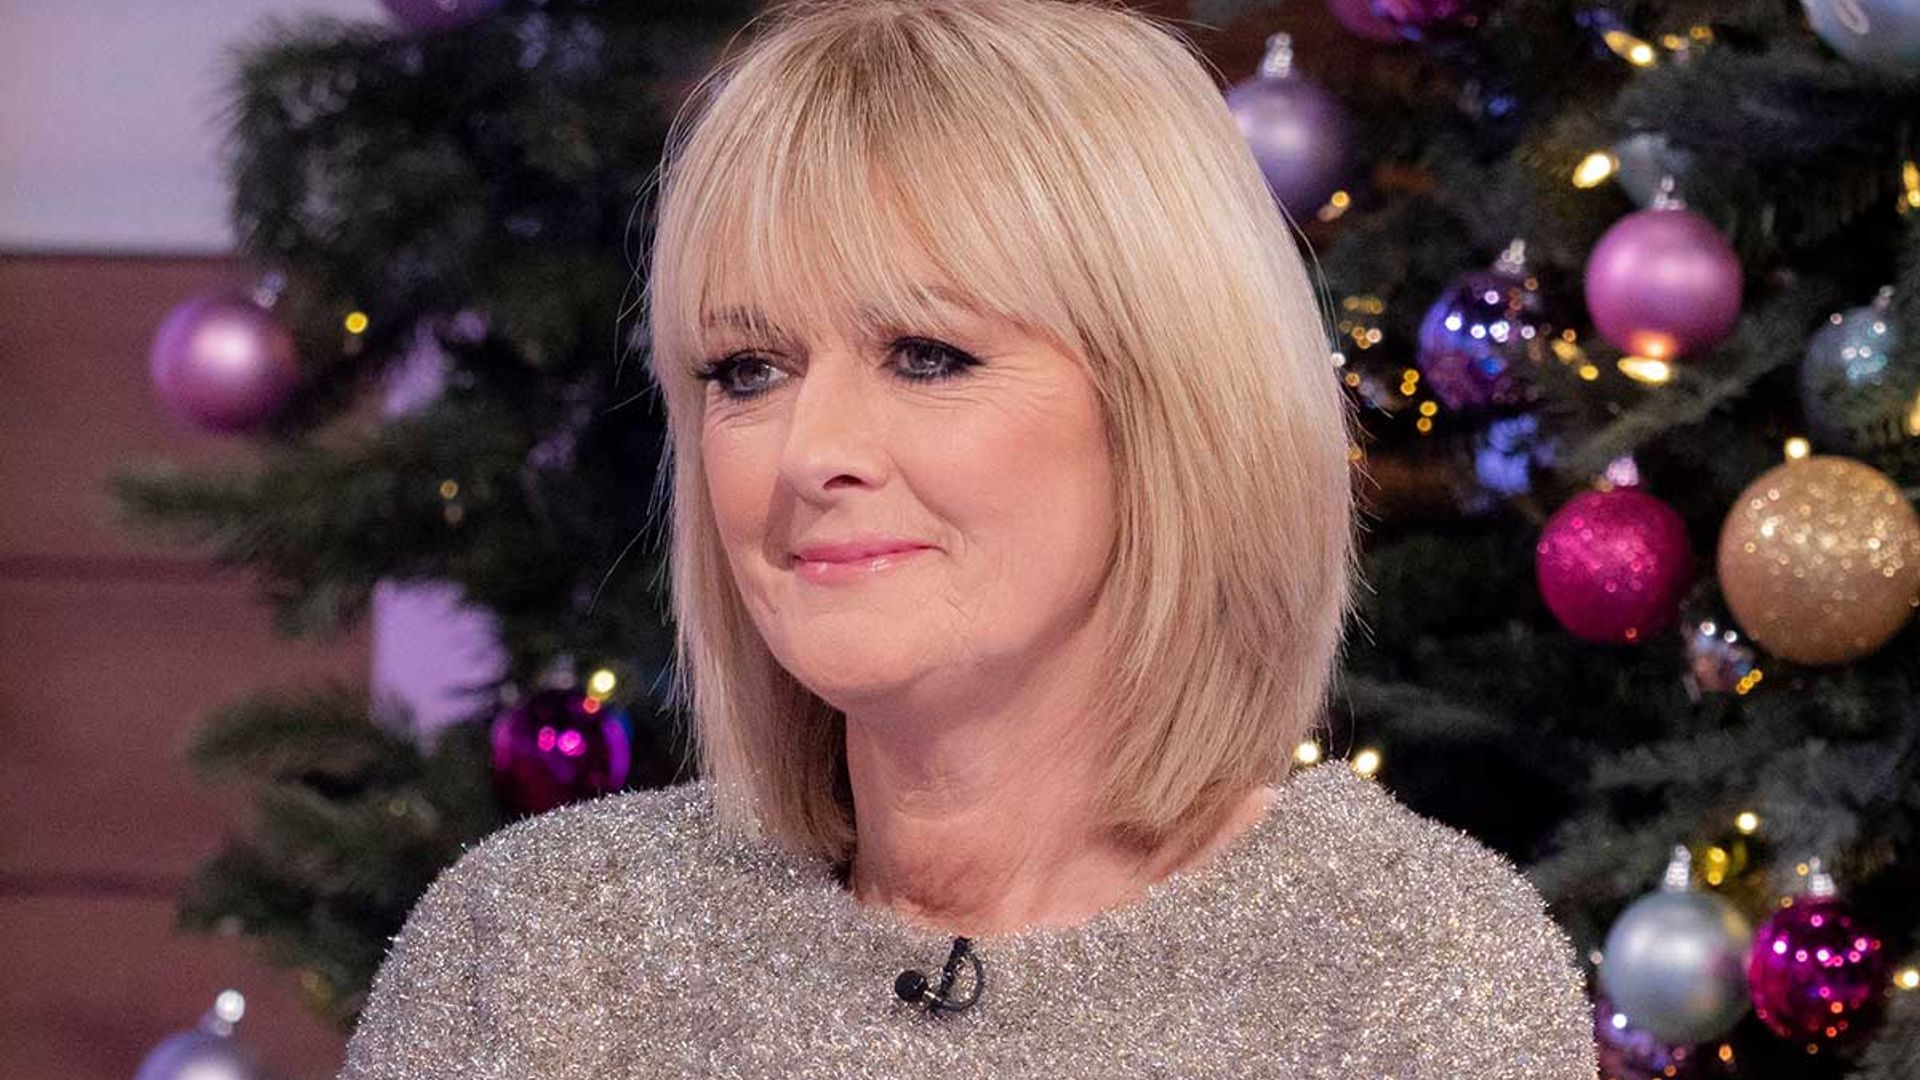 Jane Moore has fans swooning over her festive tinsel dress